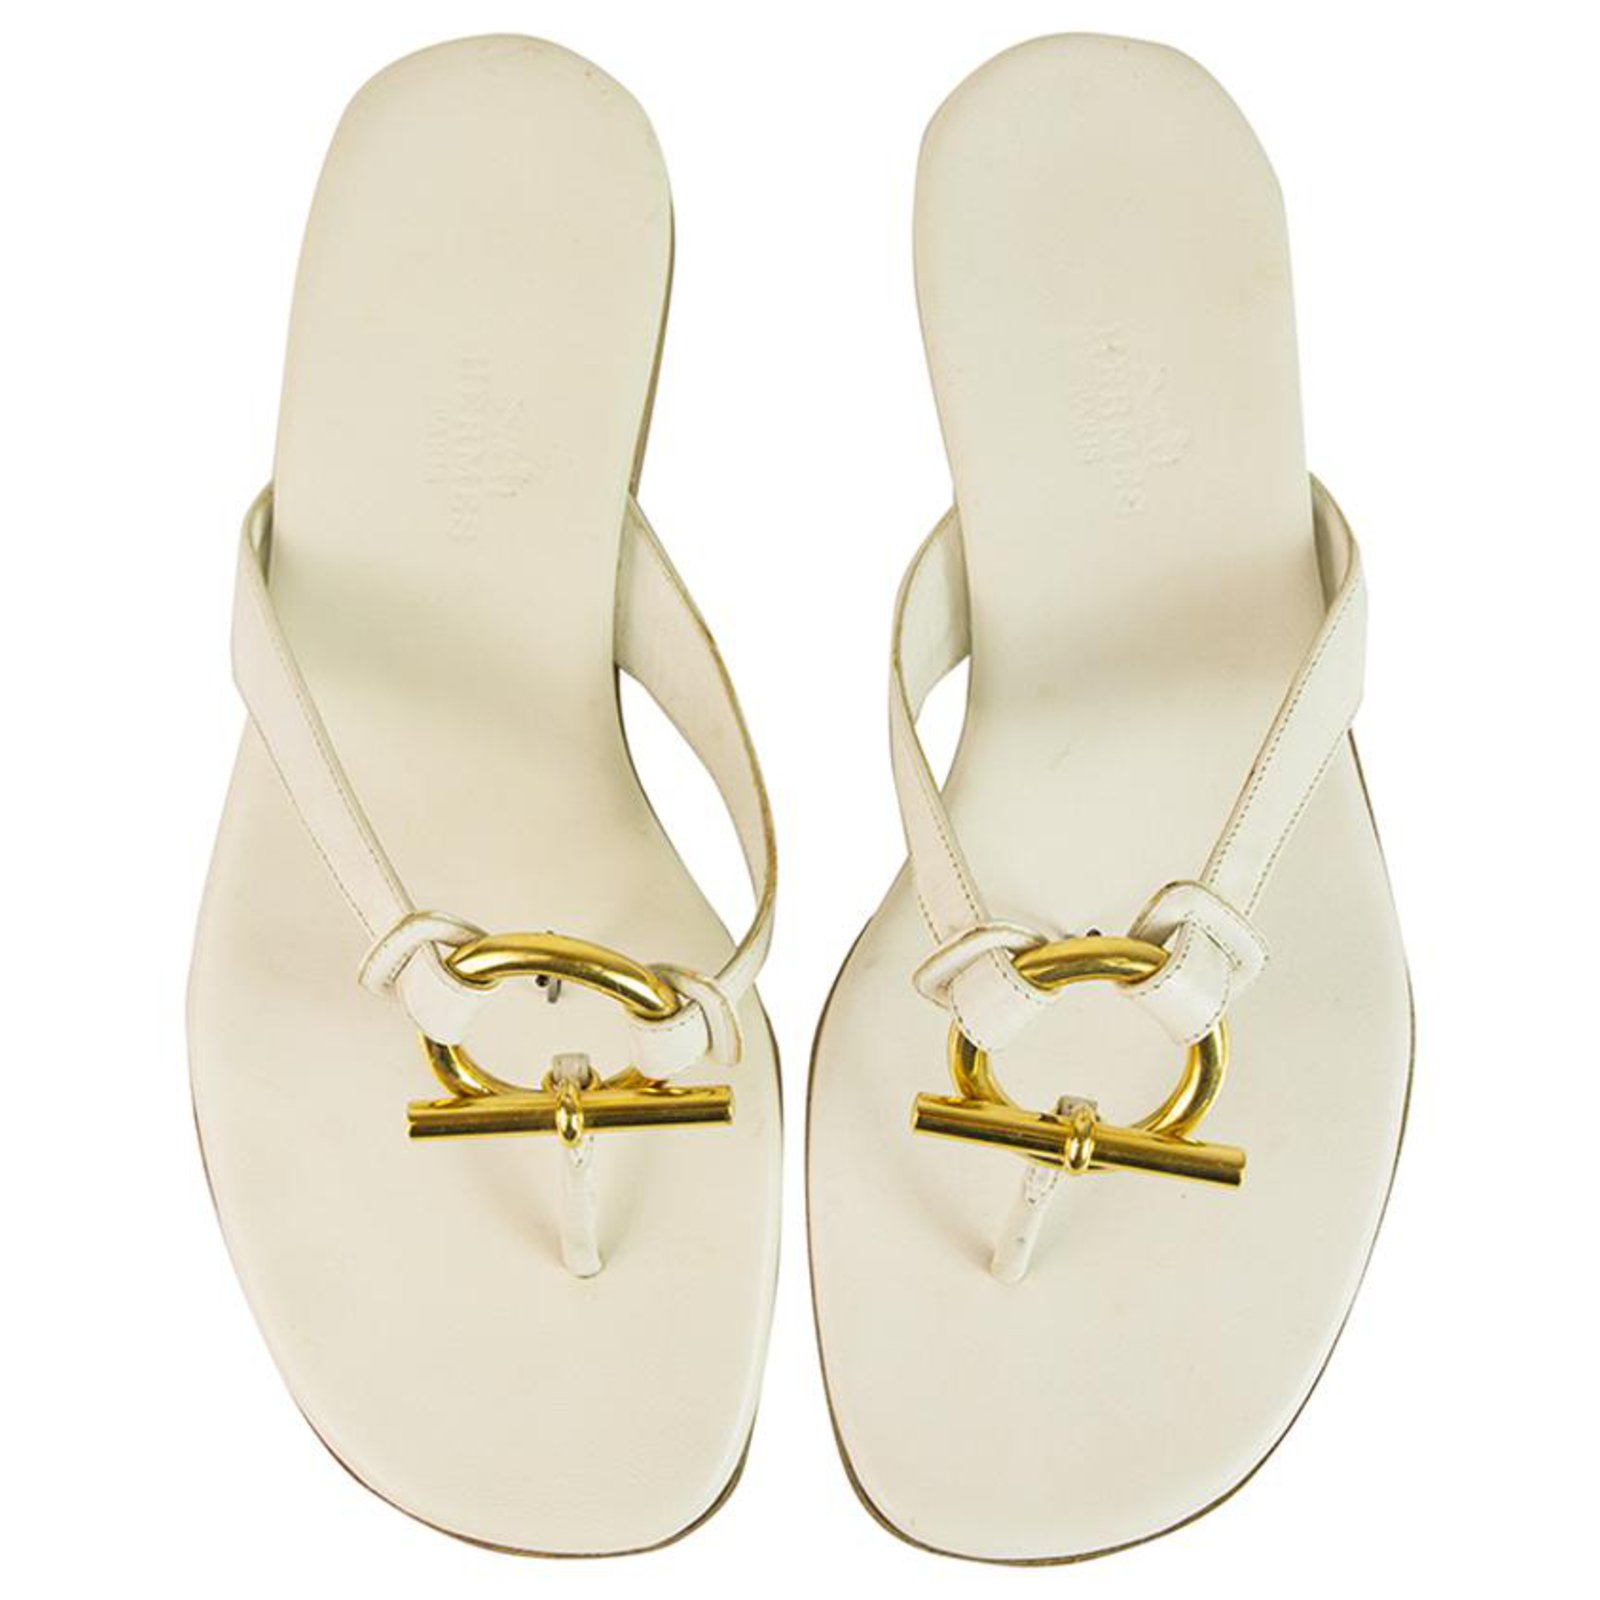 Hermes White leather sandals thongs flats summer shoes Flip Flop Gold  buckle 36